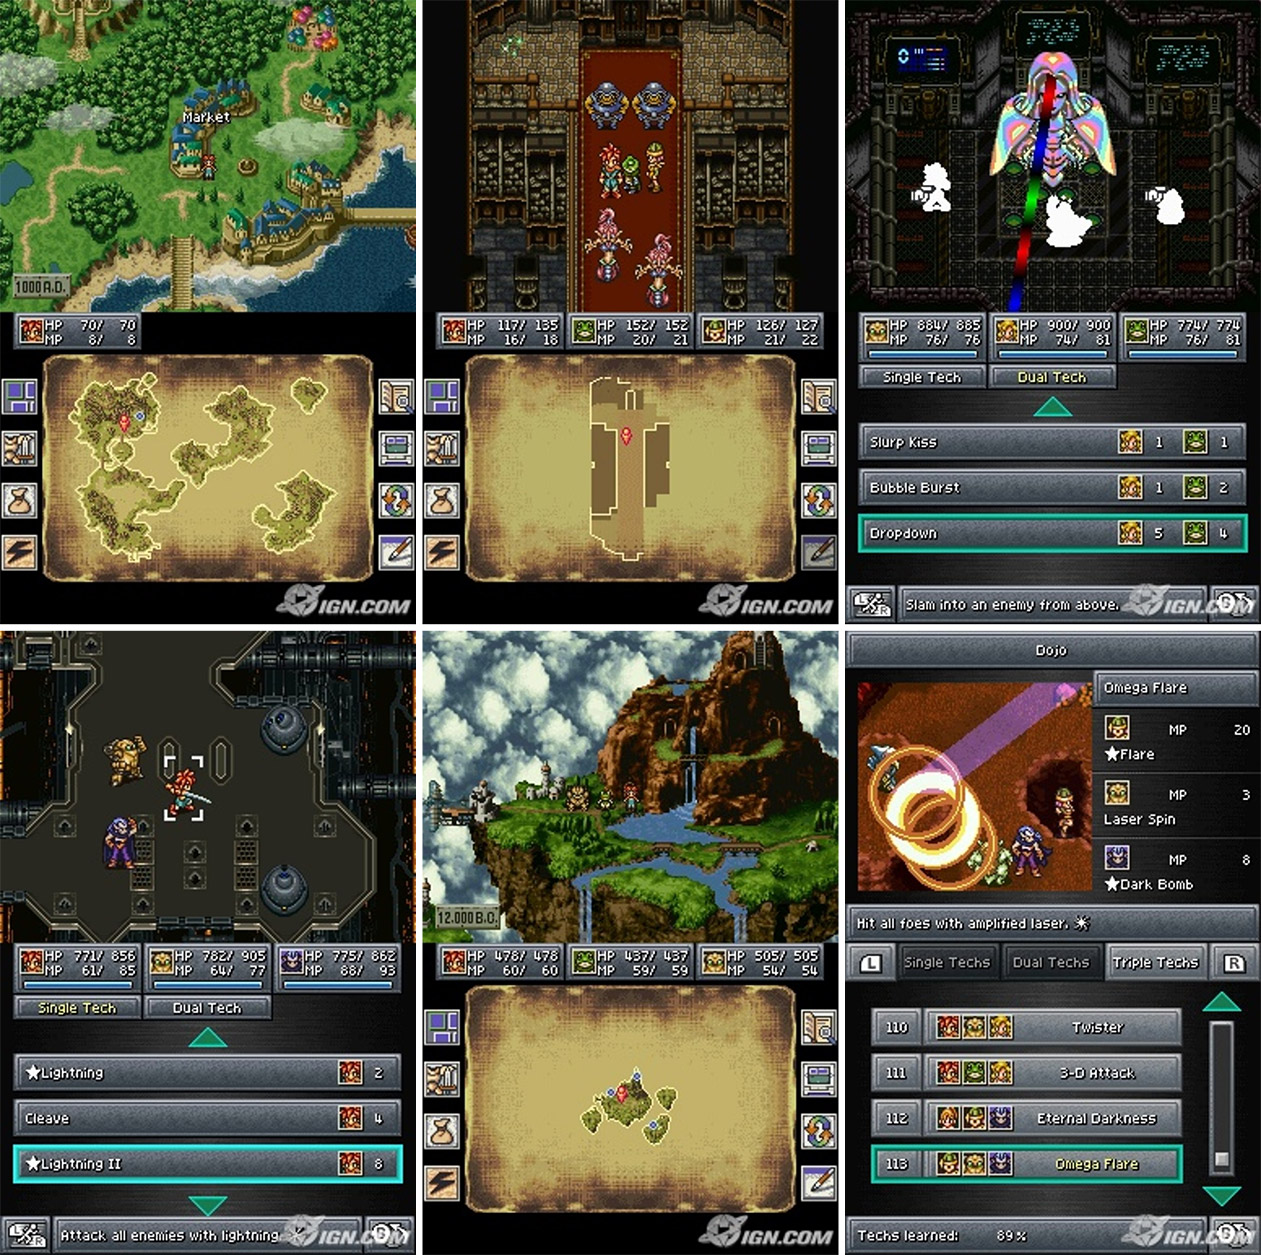 download chrono trigger nds